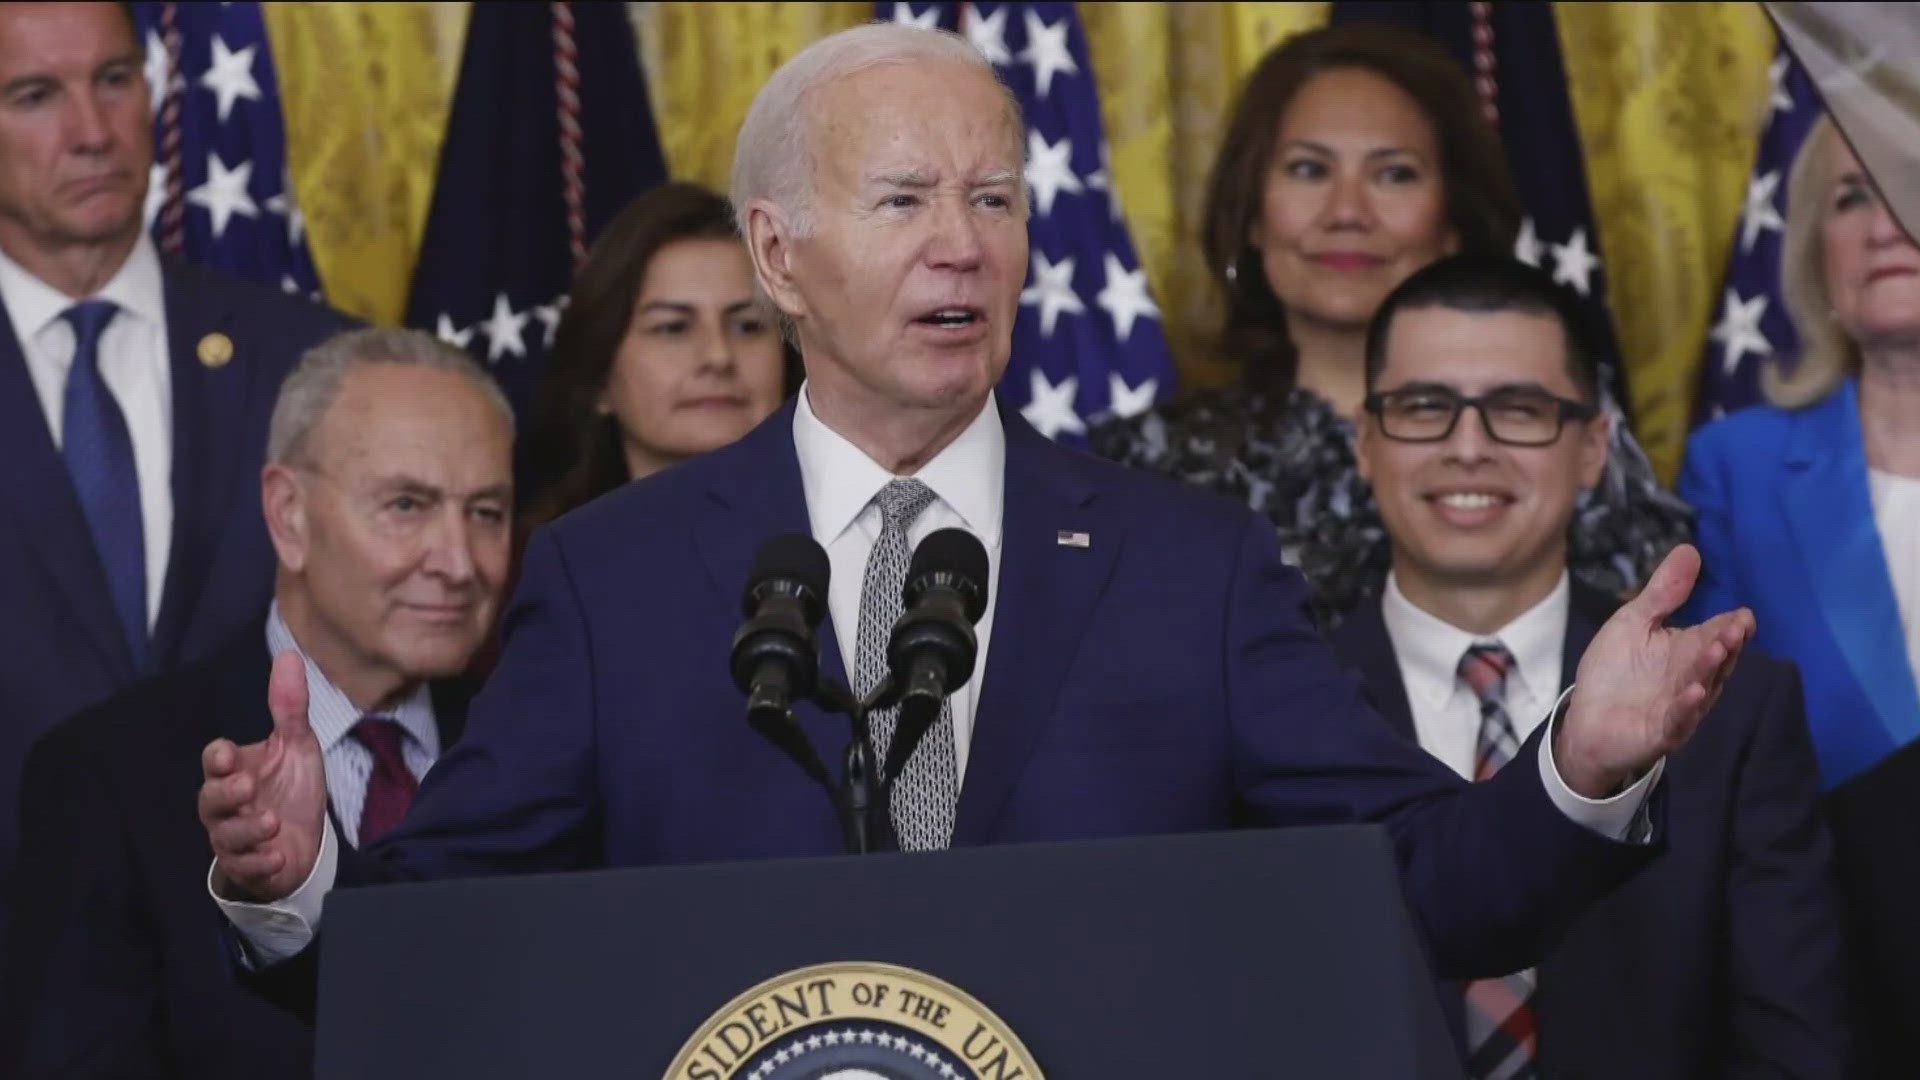 San Diego County elected officials were weighing in Sunday on President Joe Biden's announcement that he's withdrawing from the 2024 presidential campaign.